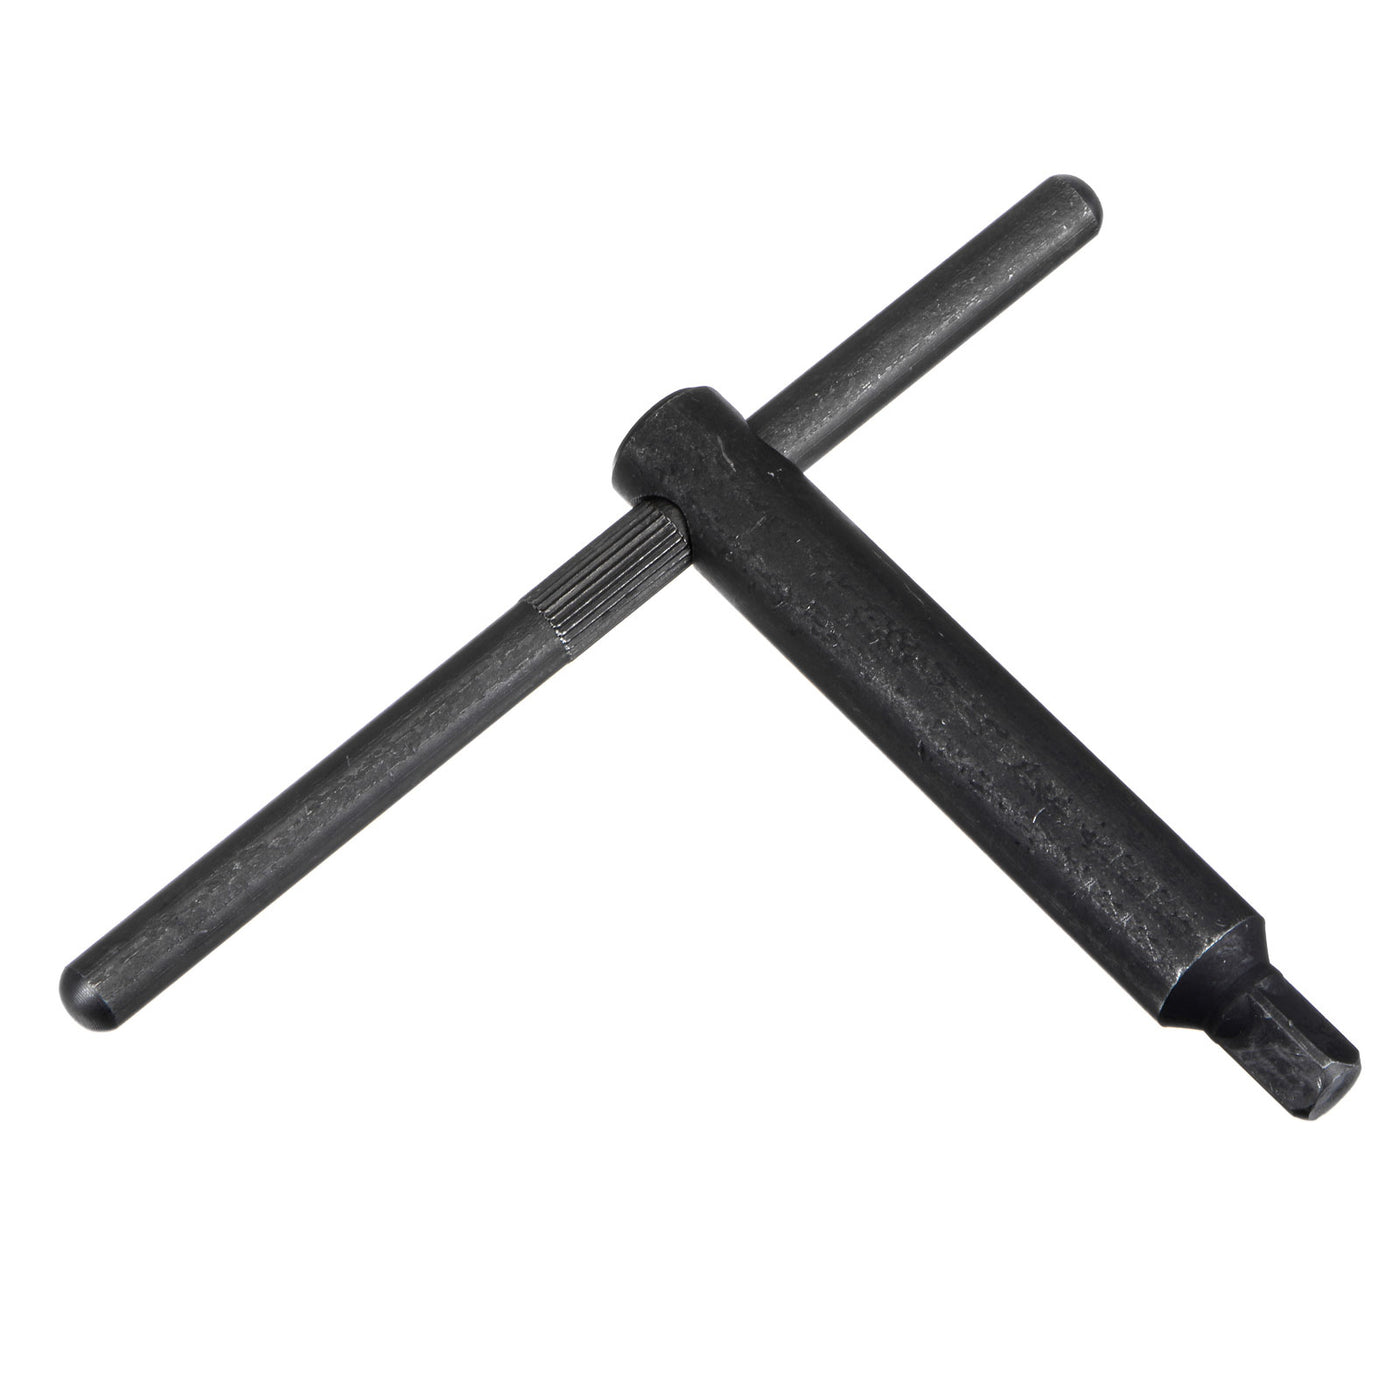 Uxcell Uxcell Lathe Chuck Wrench, 12mm Square Head Key Spanner Tool, 2 Pcs (L200x220mm)